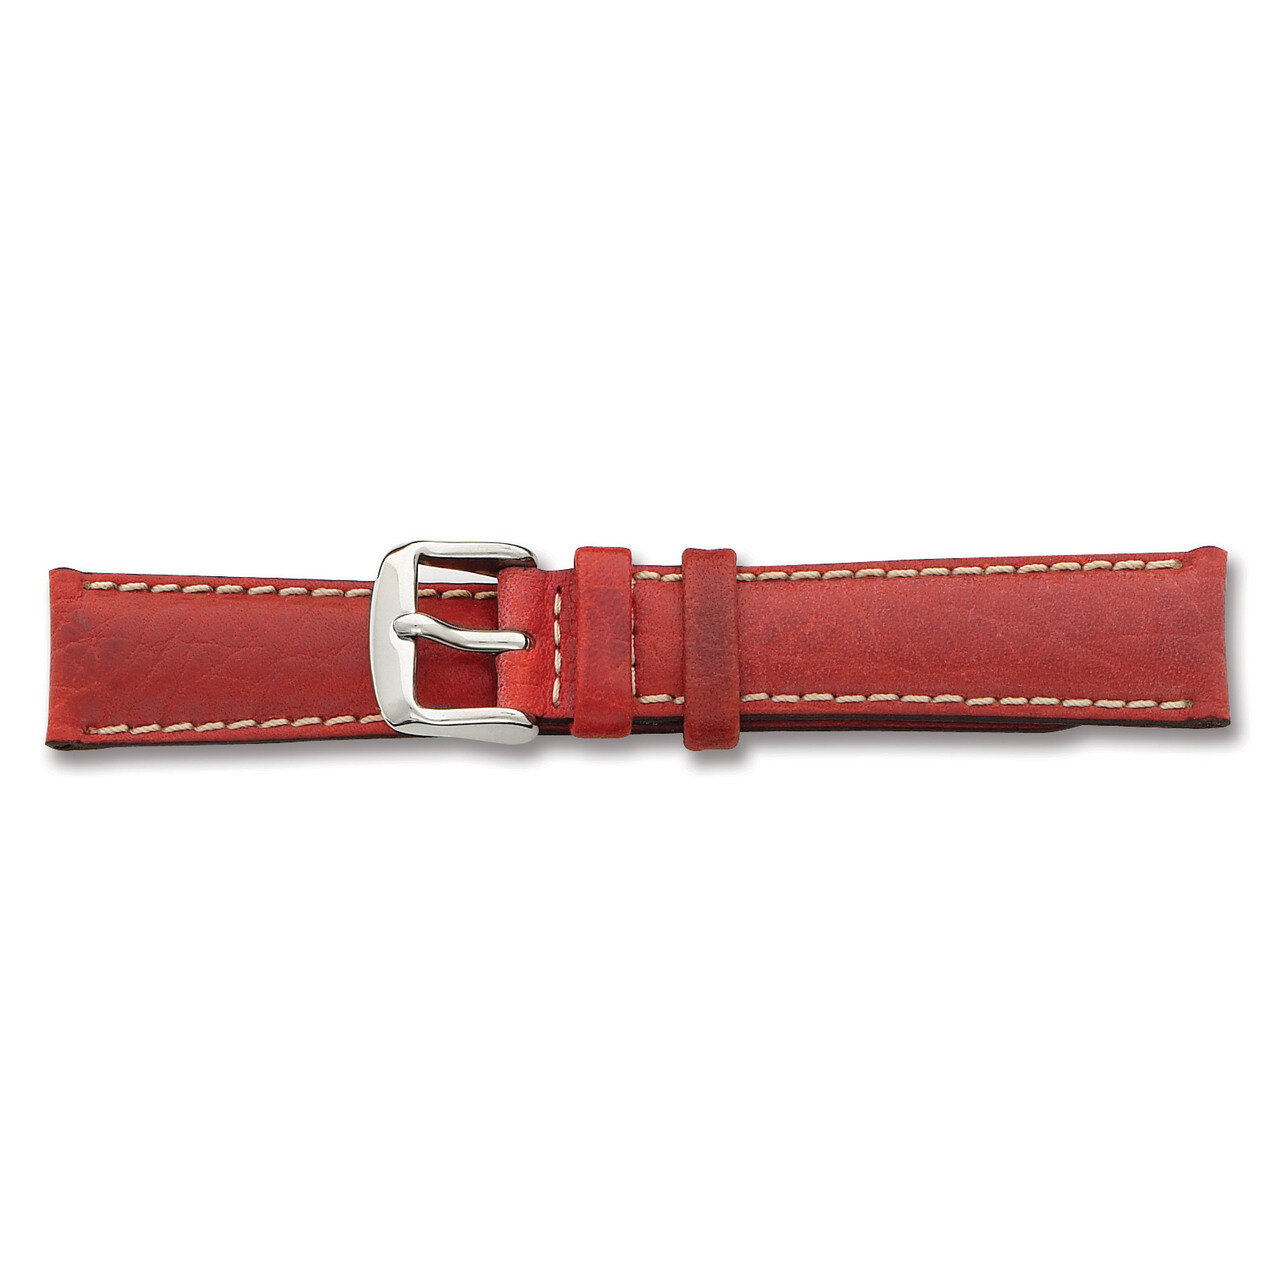 20mm Red Sport Leather White Stitch Watch Band 7.5 Inch Silver-tone Buckle BA138-20